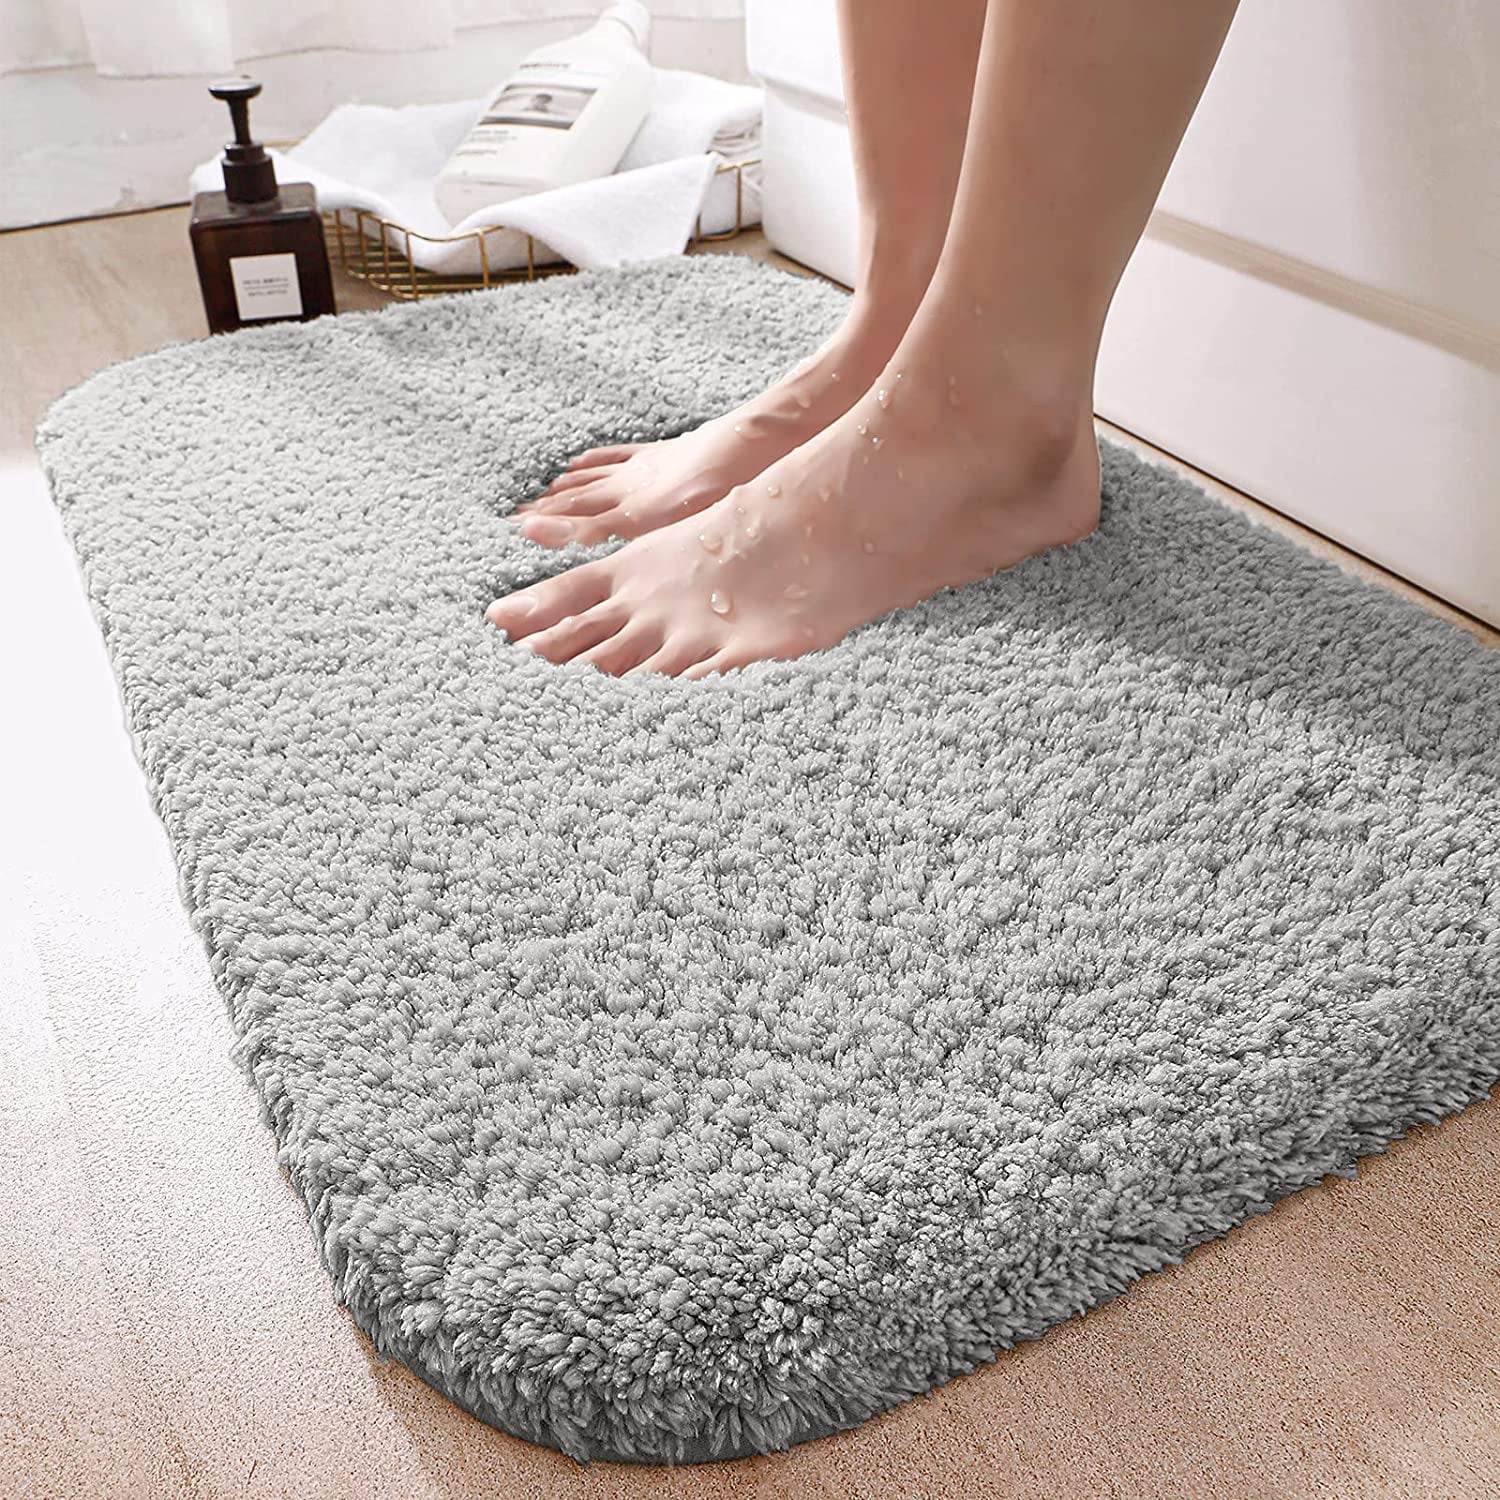 Upgraded Soft Absorbent Non Slip Bath Mat 16x24 Fluffy Thick Microfiber  Cozy Throw Bathroom Rugs with Waterproof Backing for Tub Shower Kitchen